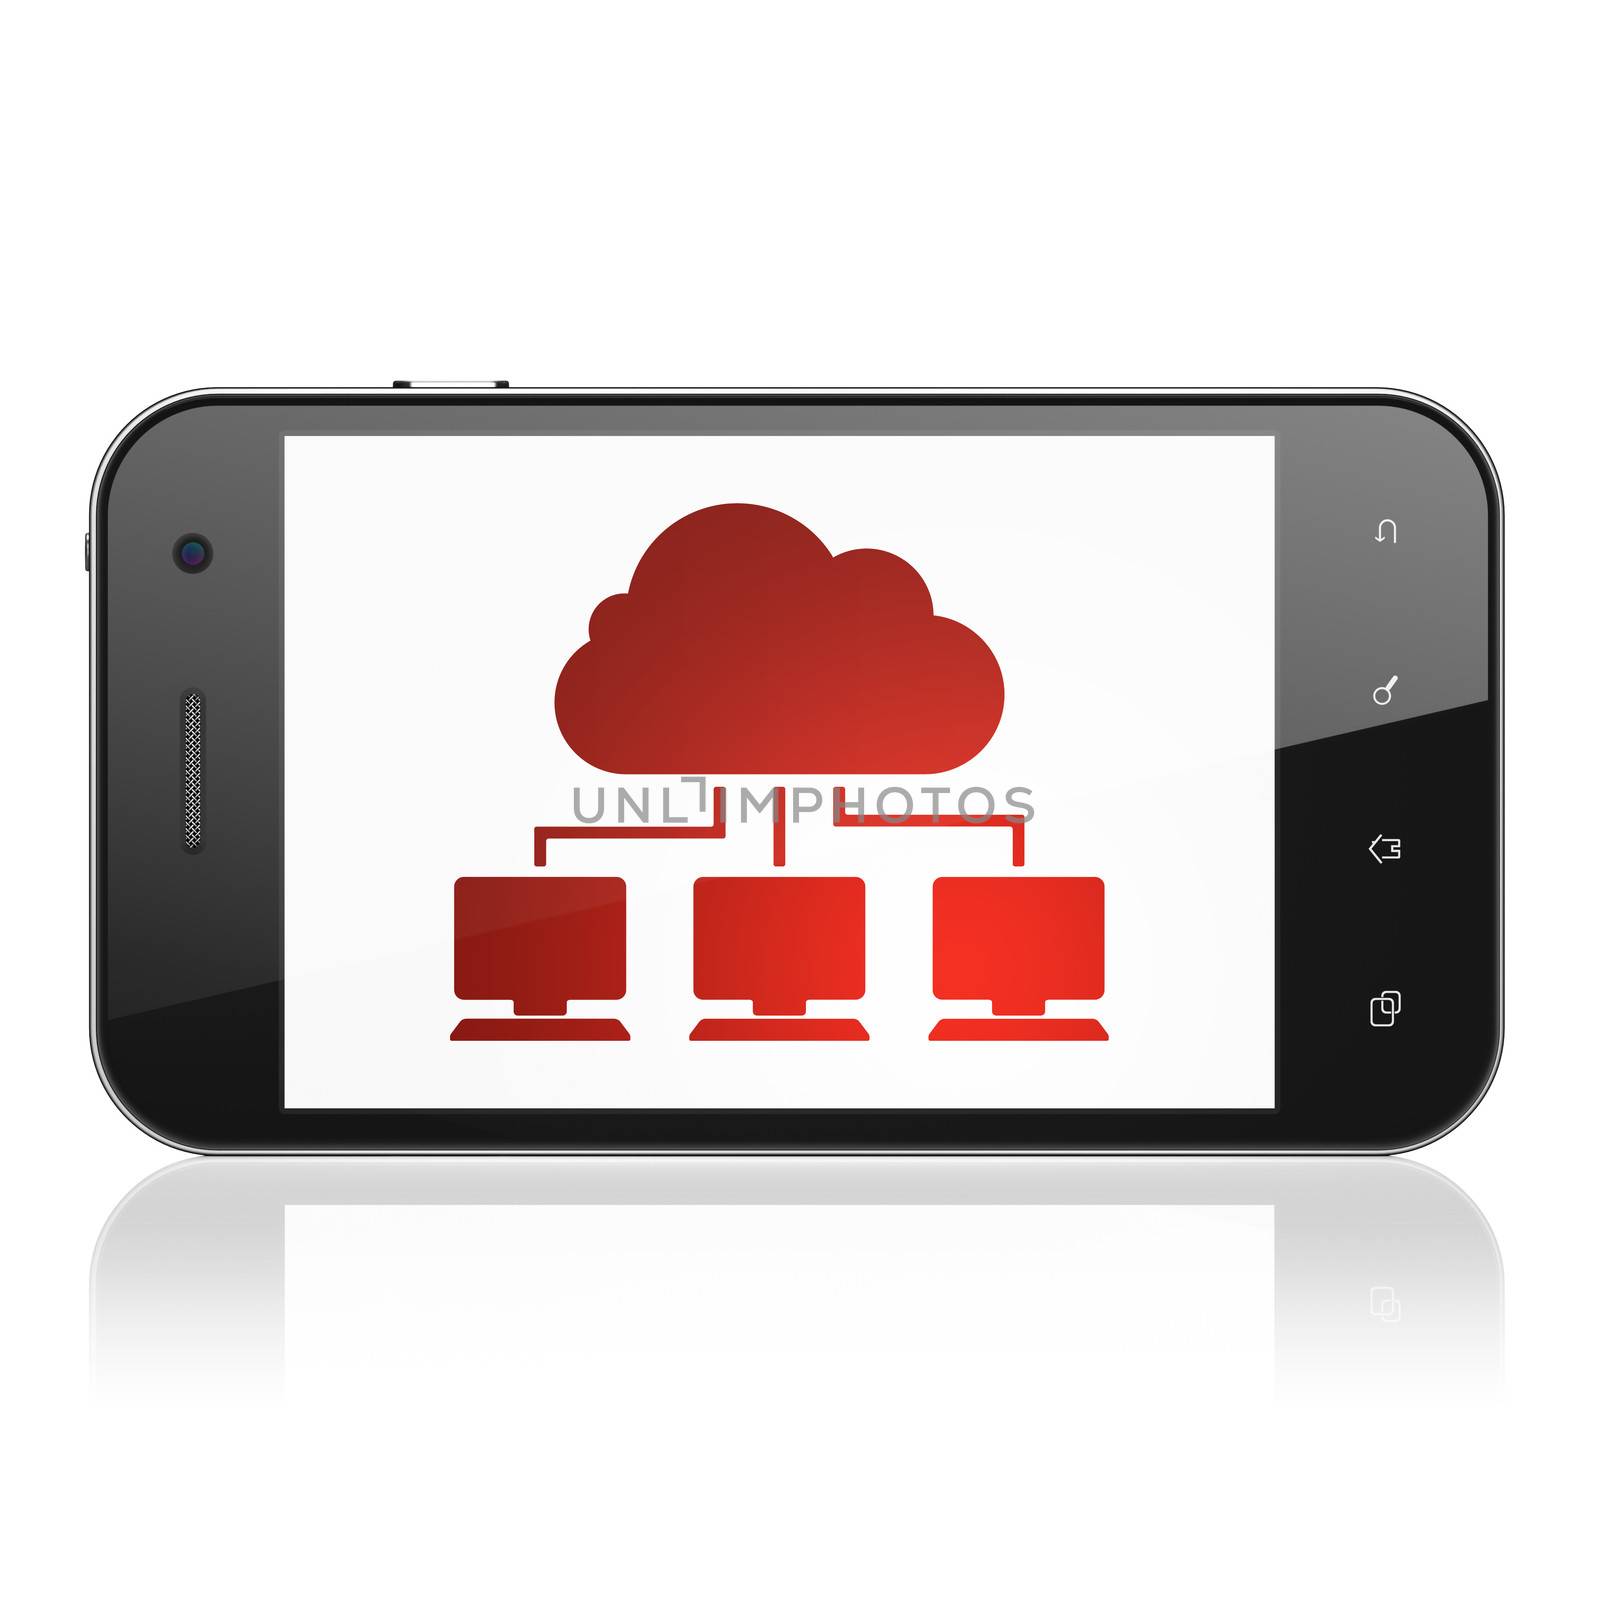 Cloud networking concept: smartphone with Cloud Network icon on display. Mobile smart phone on White background, cell phone 3d render